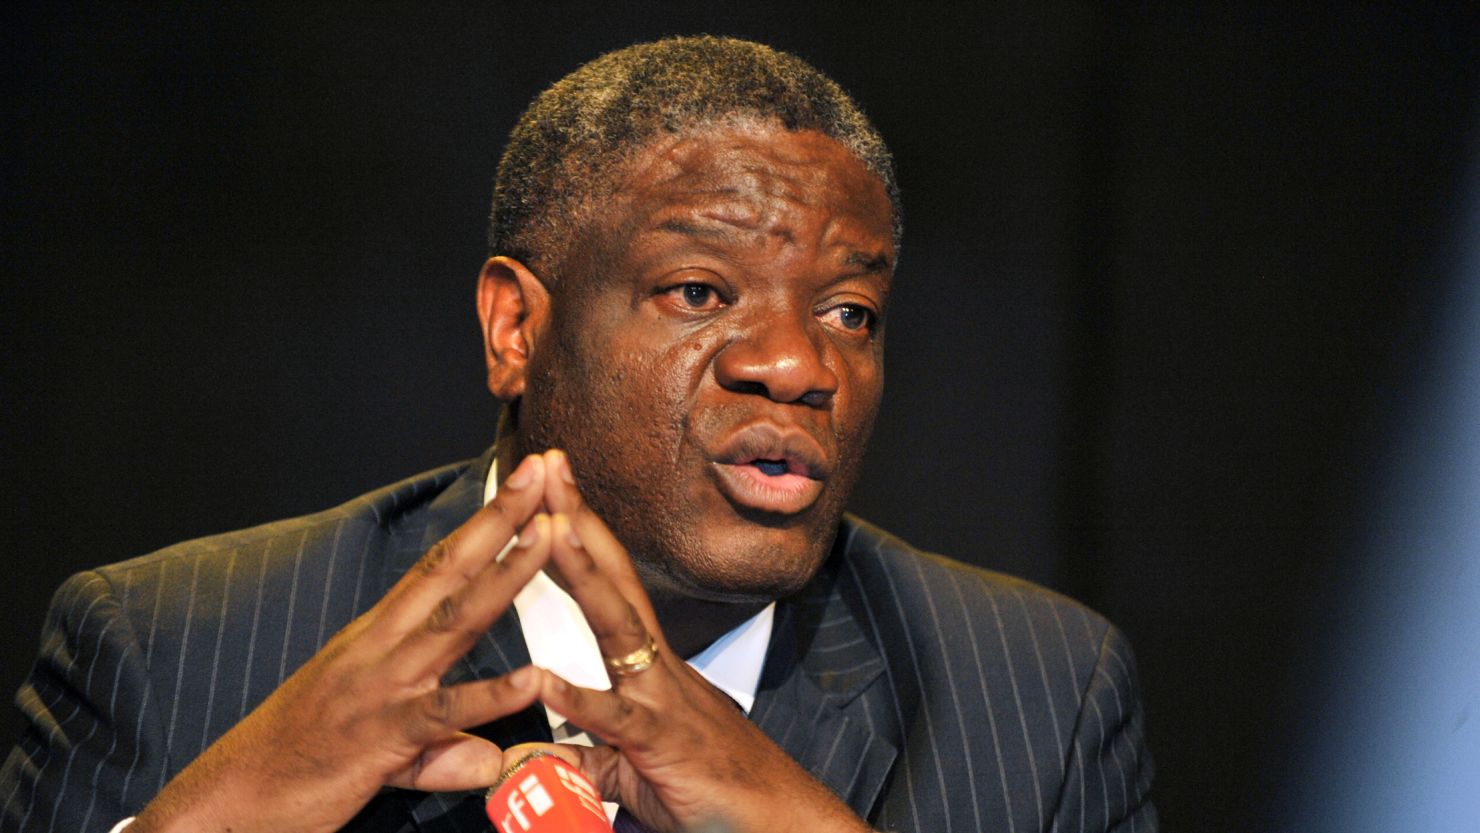 Denis Mukwege is among the favorites to win this year's Nobel Peace Prize.